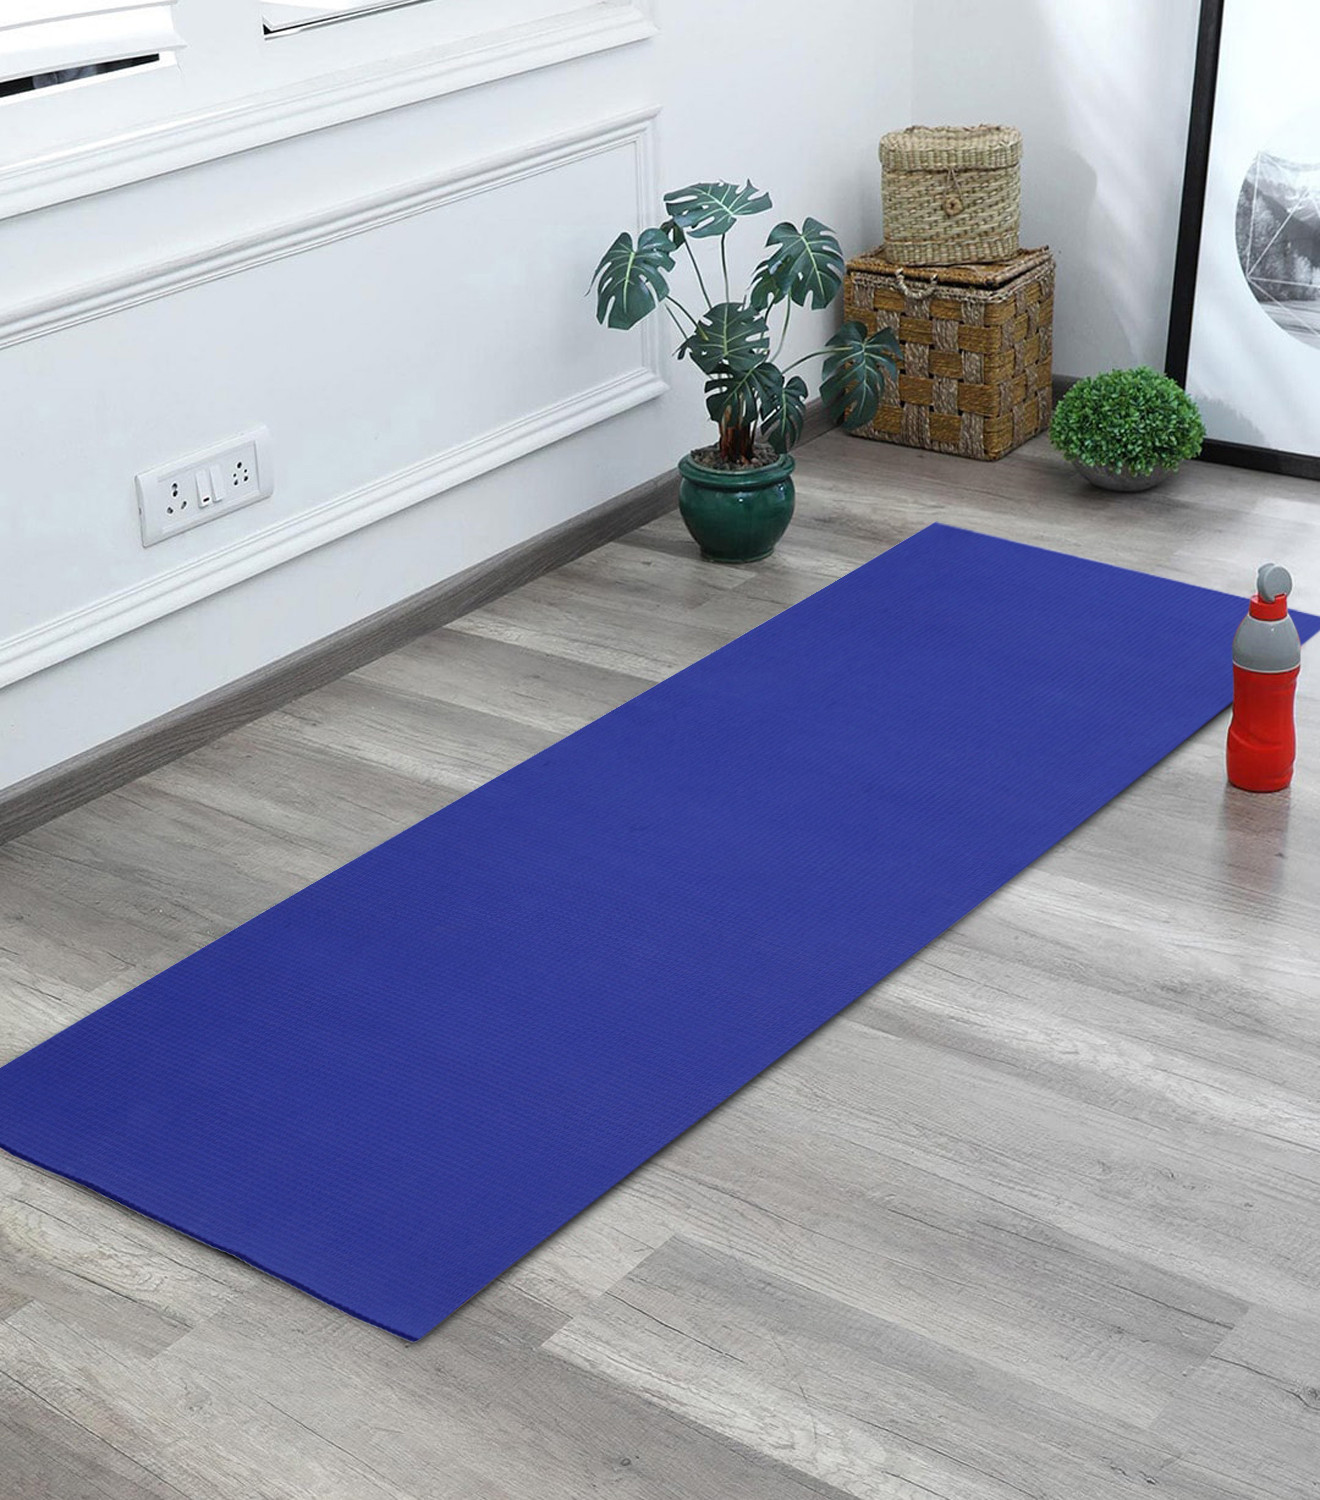 Kuber Industries 6 MM Extra Thick Yoga mat for Gym Workout and Flooring Exercise Long Size Yoga Mat for Men and Women, 6 x 2 Feet (Royal Blue)-33_S_KUBQMART11594